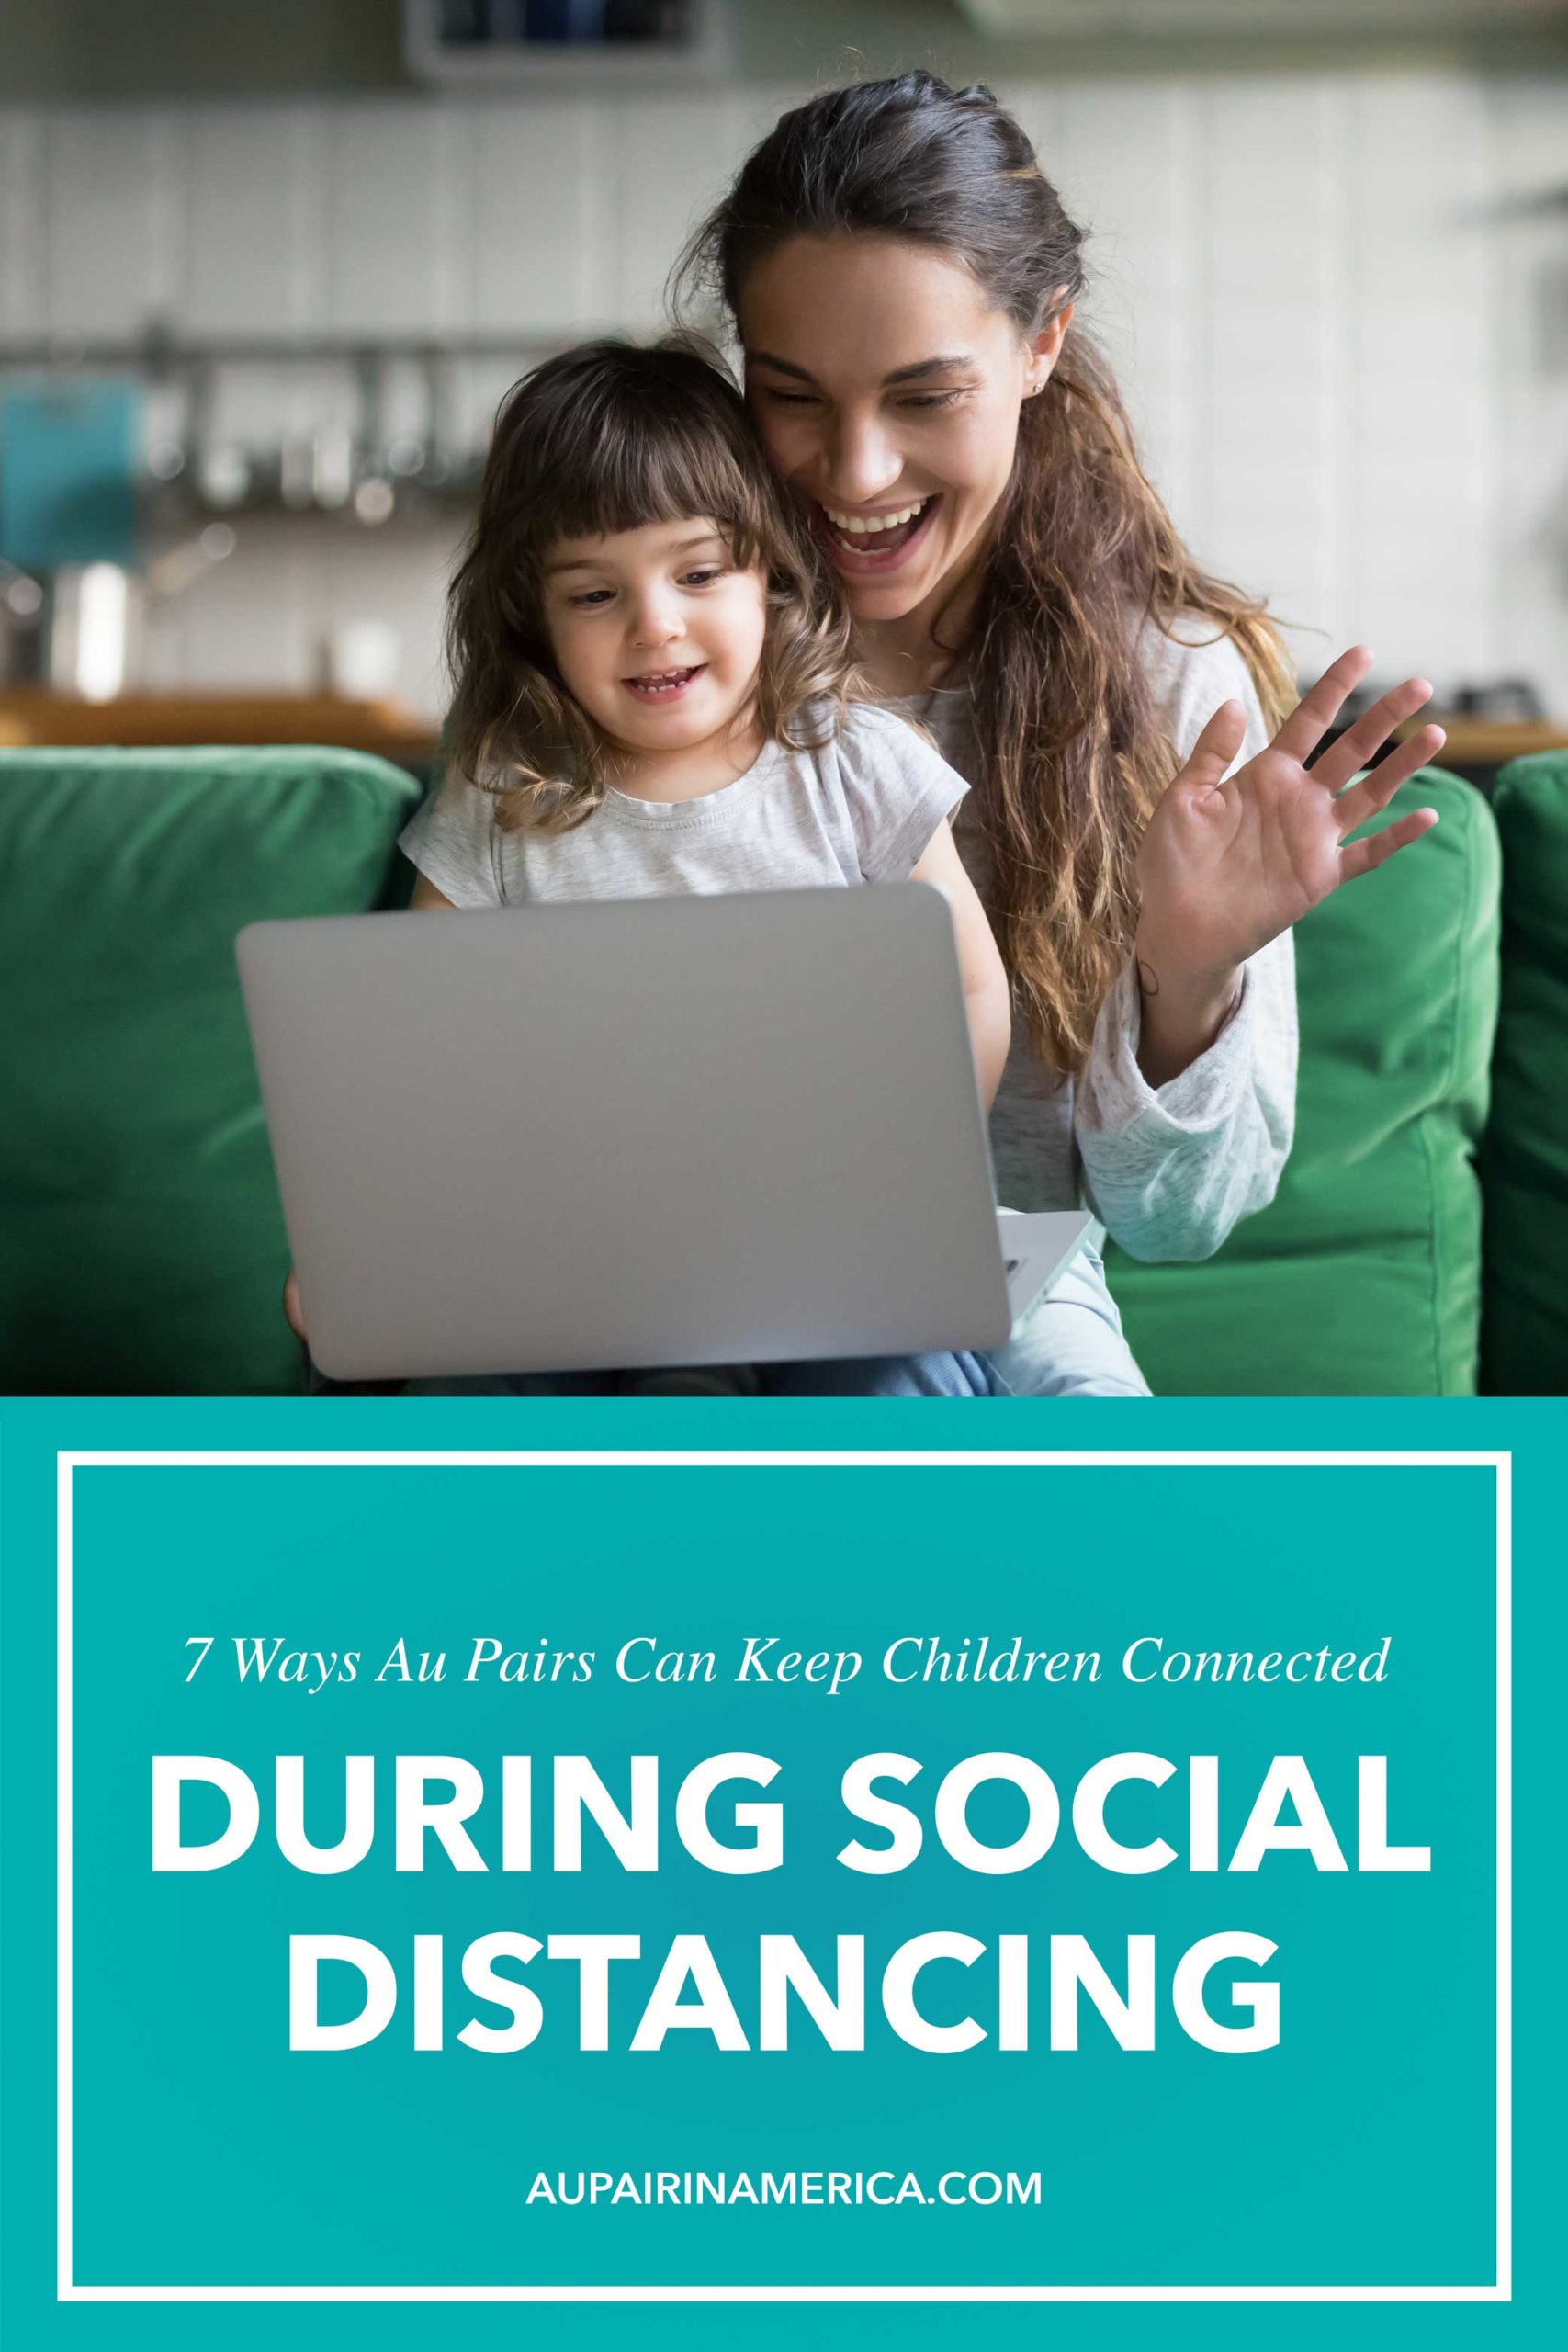 Discover activities for au pairs to help keep children connected during social distancing